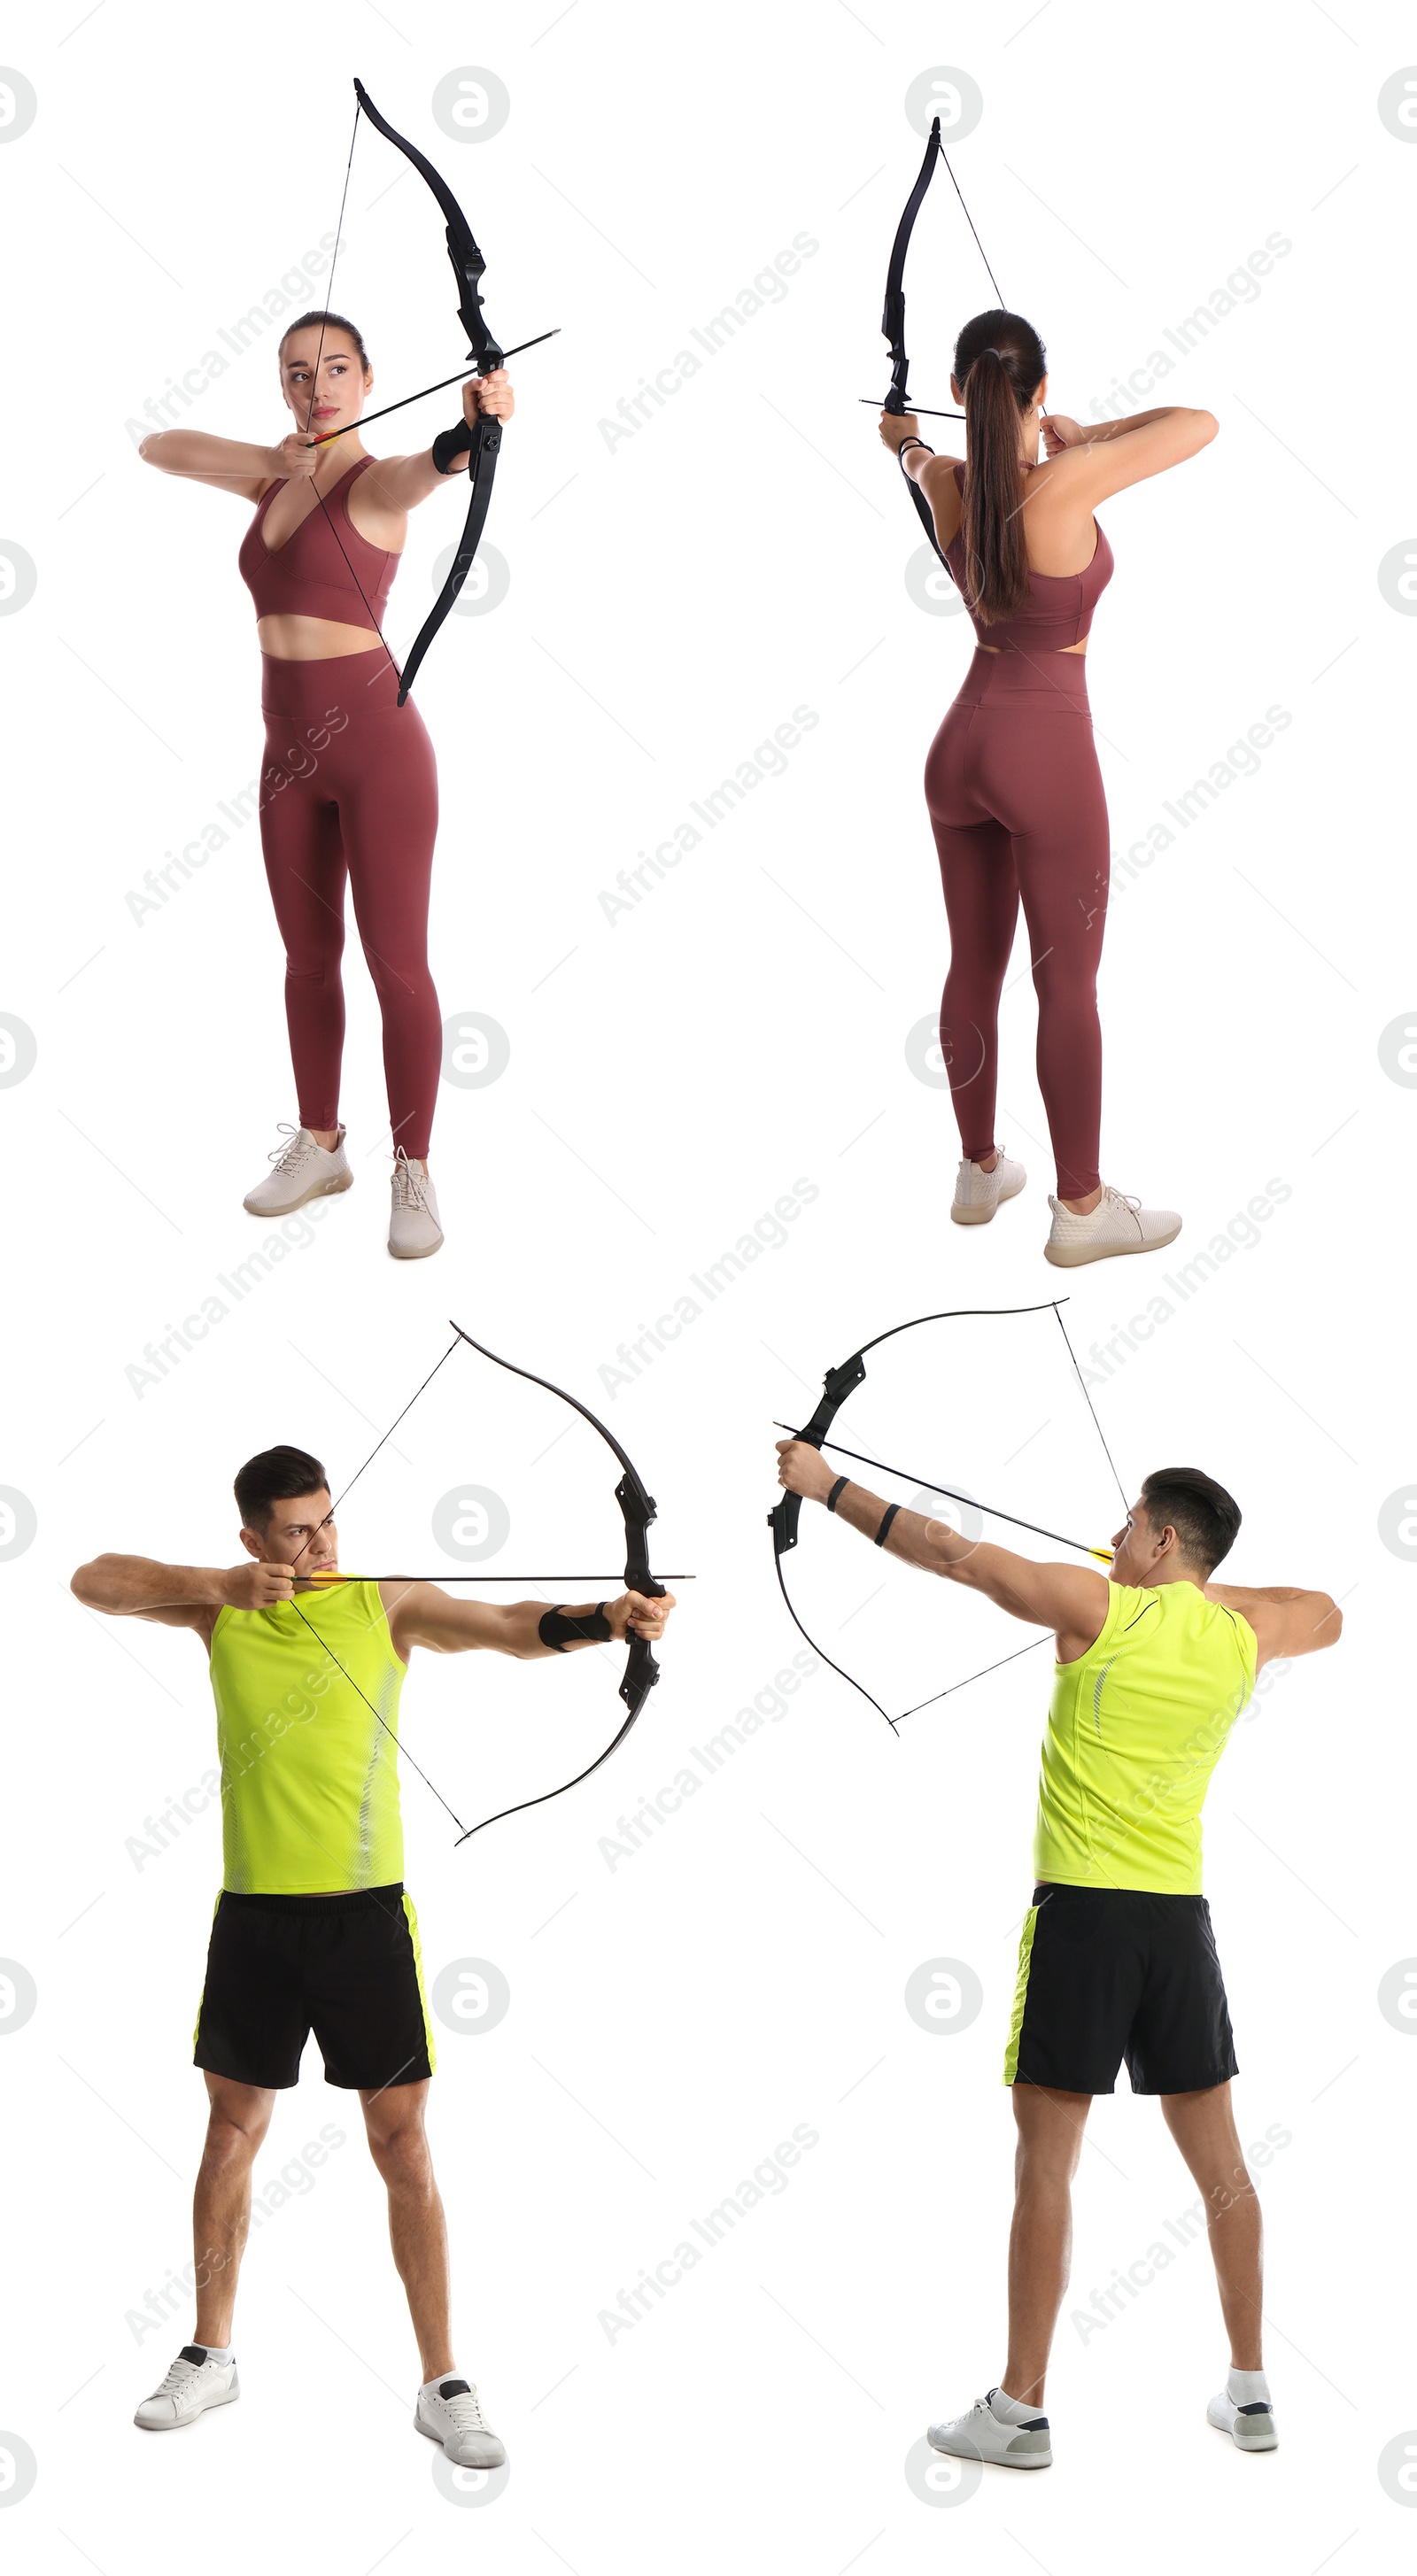 Image of People practicing archery on white background, collage